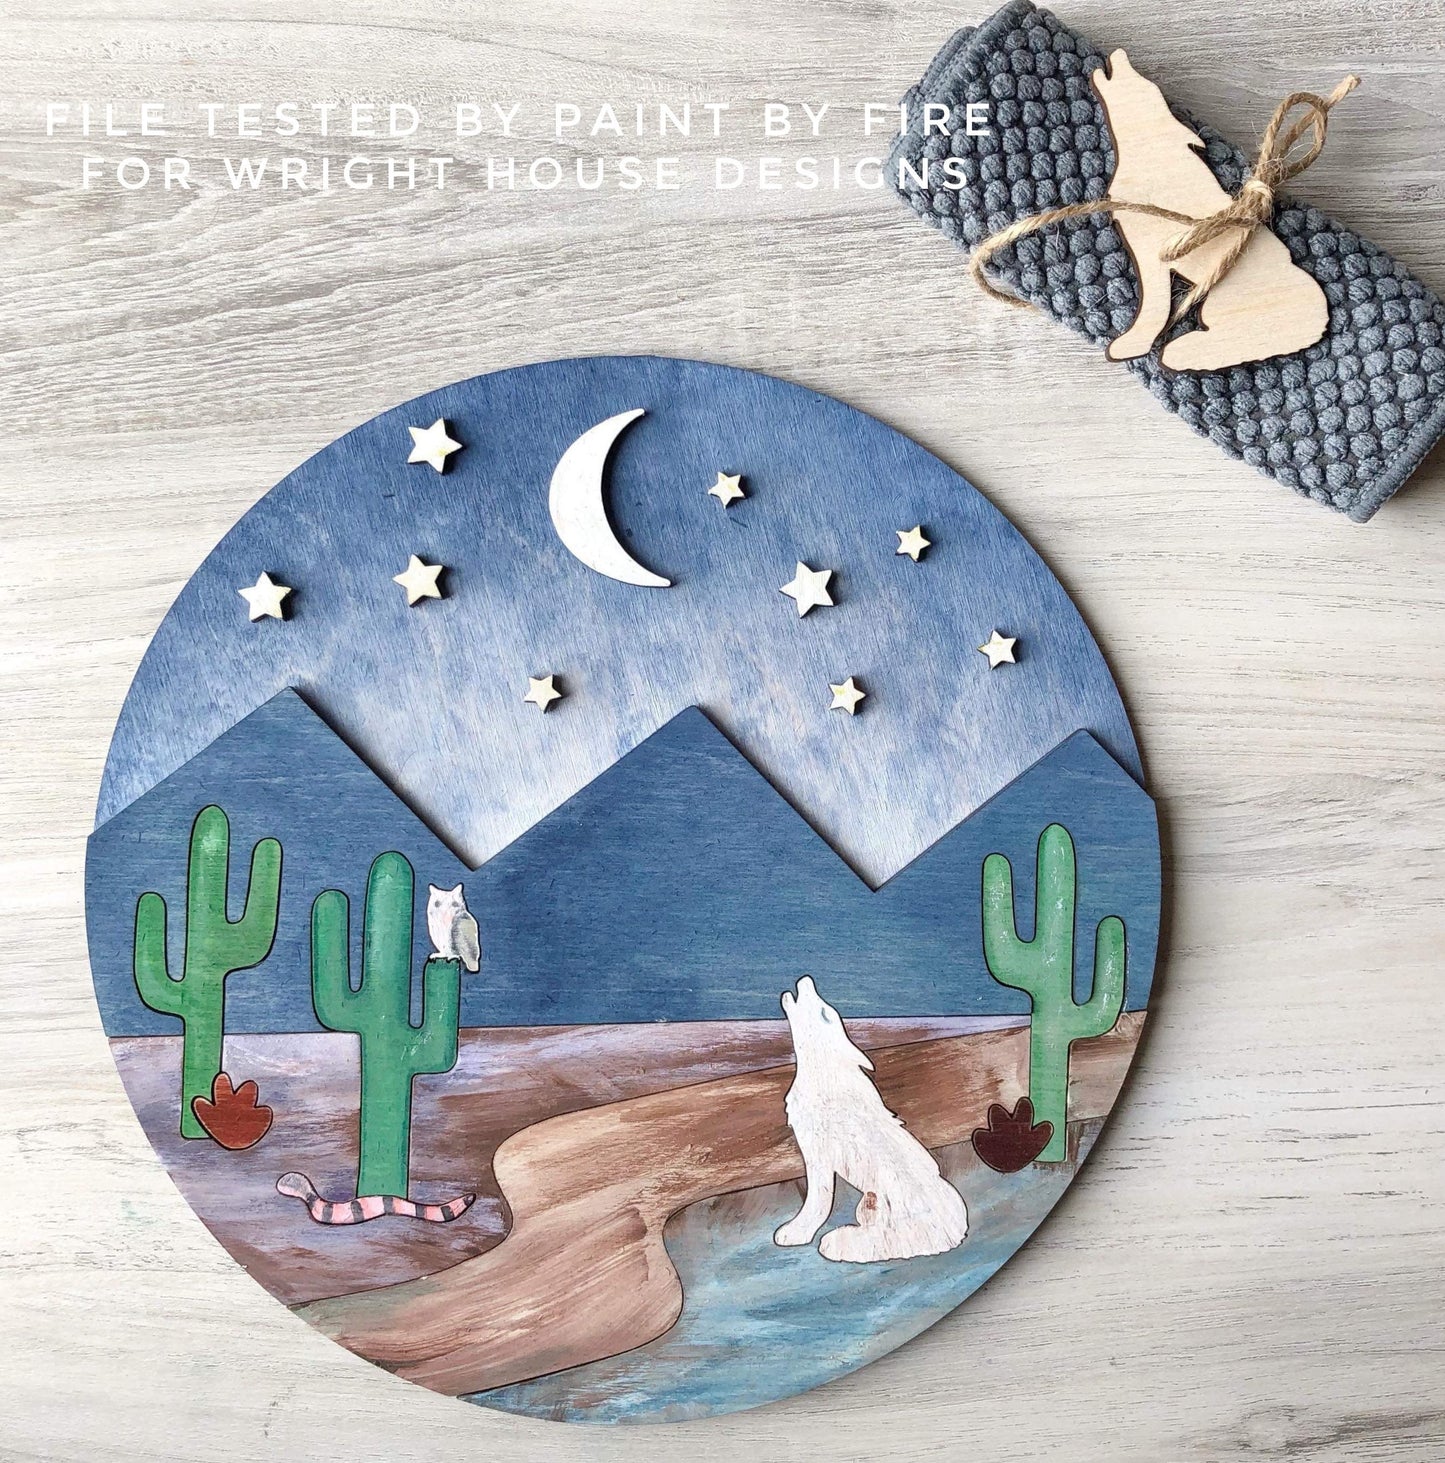 The Desert At Night Baby Boy Nursery Round - Sign Making Home Decor and DIY Kits - Cut File For Glowforge Lasers - Digital SVG File